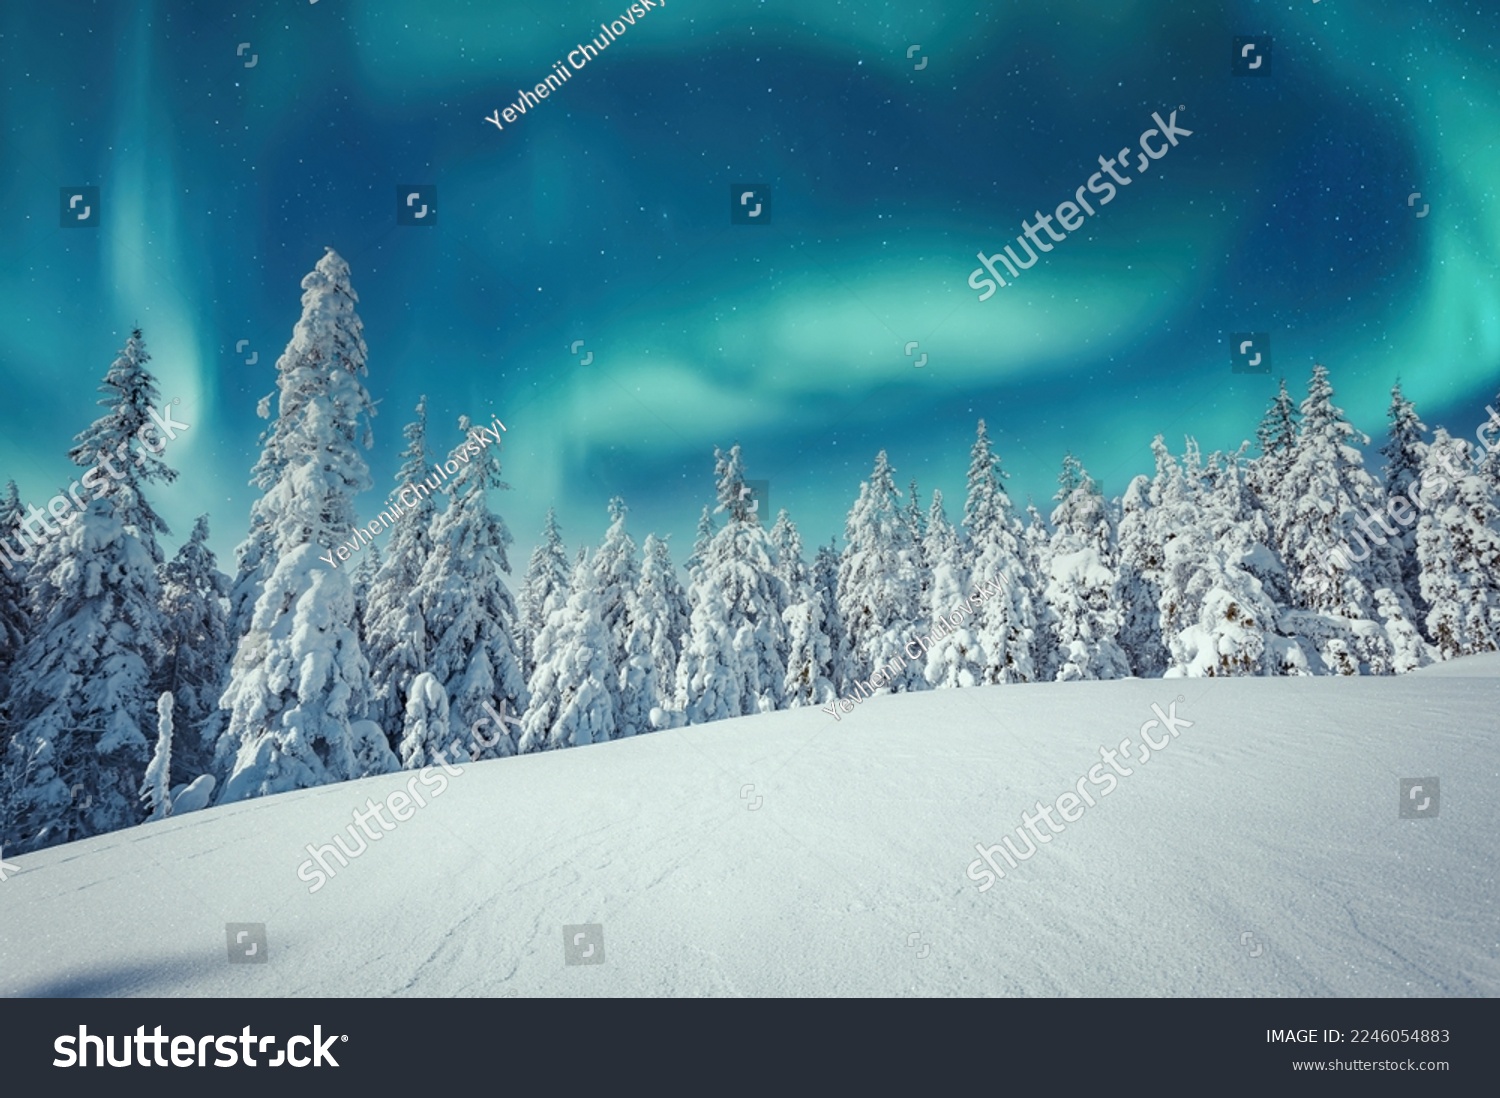 Aurora borealis over the frosty forest. Green northern lights above mountains. Night nature landscape with polar lights. Night winter landscape with aurora. Creative image. winter holiday concept. #2246054883